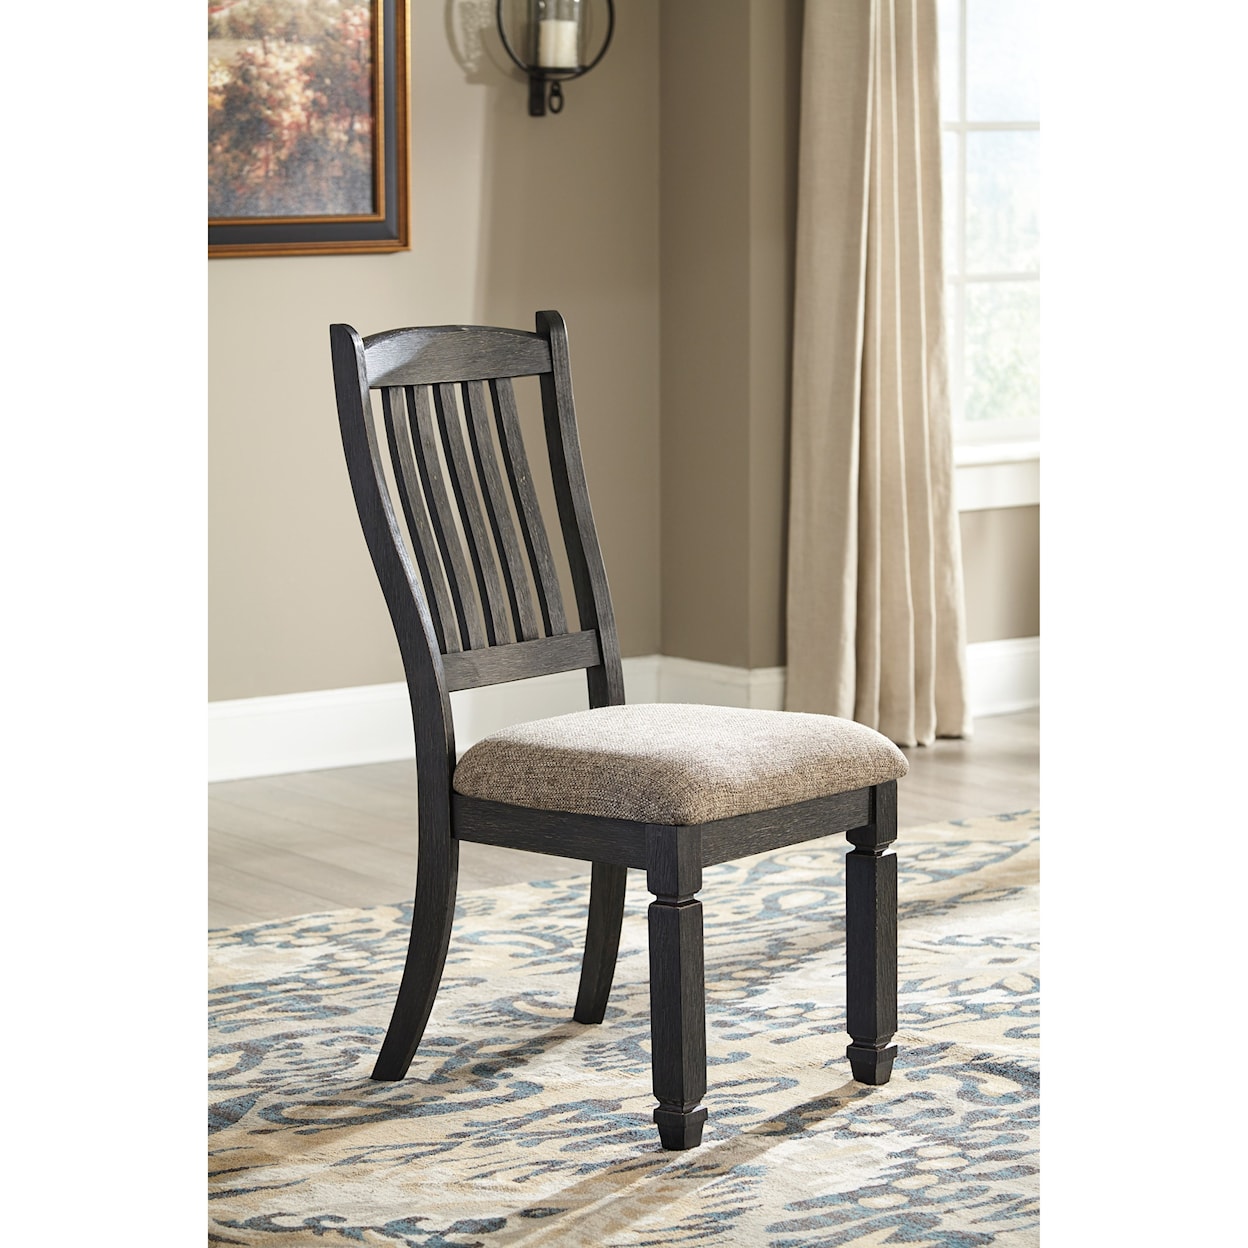 Signature Design by Ashley Tyler Creek Upholstered Side Chair